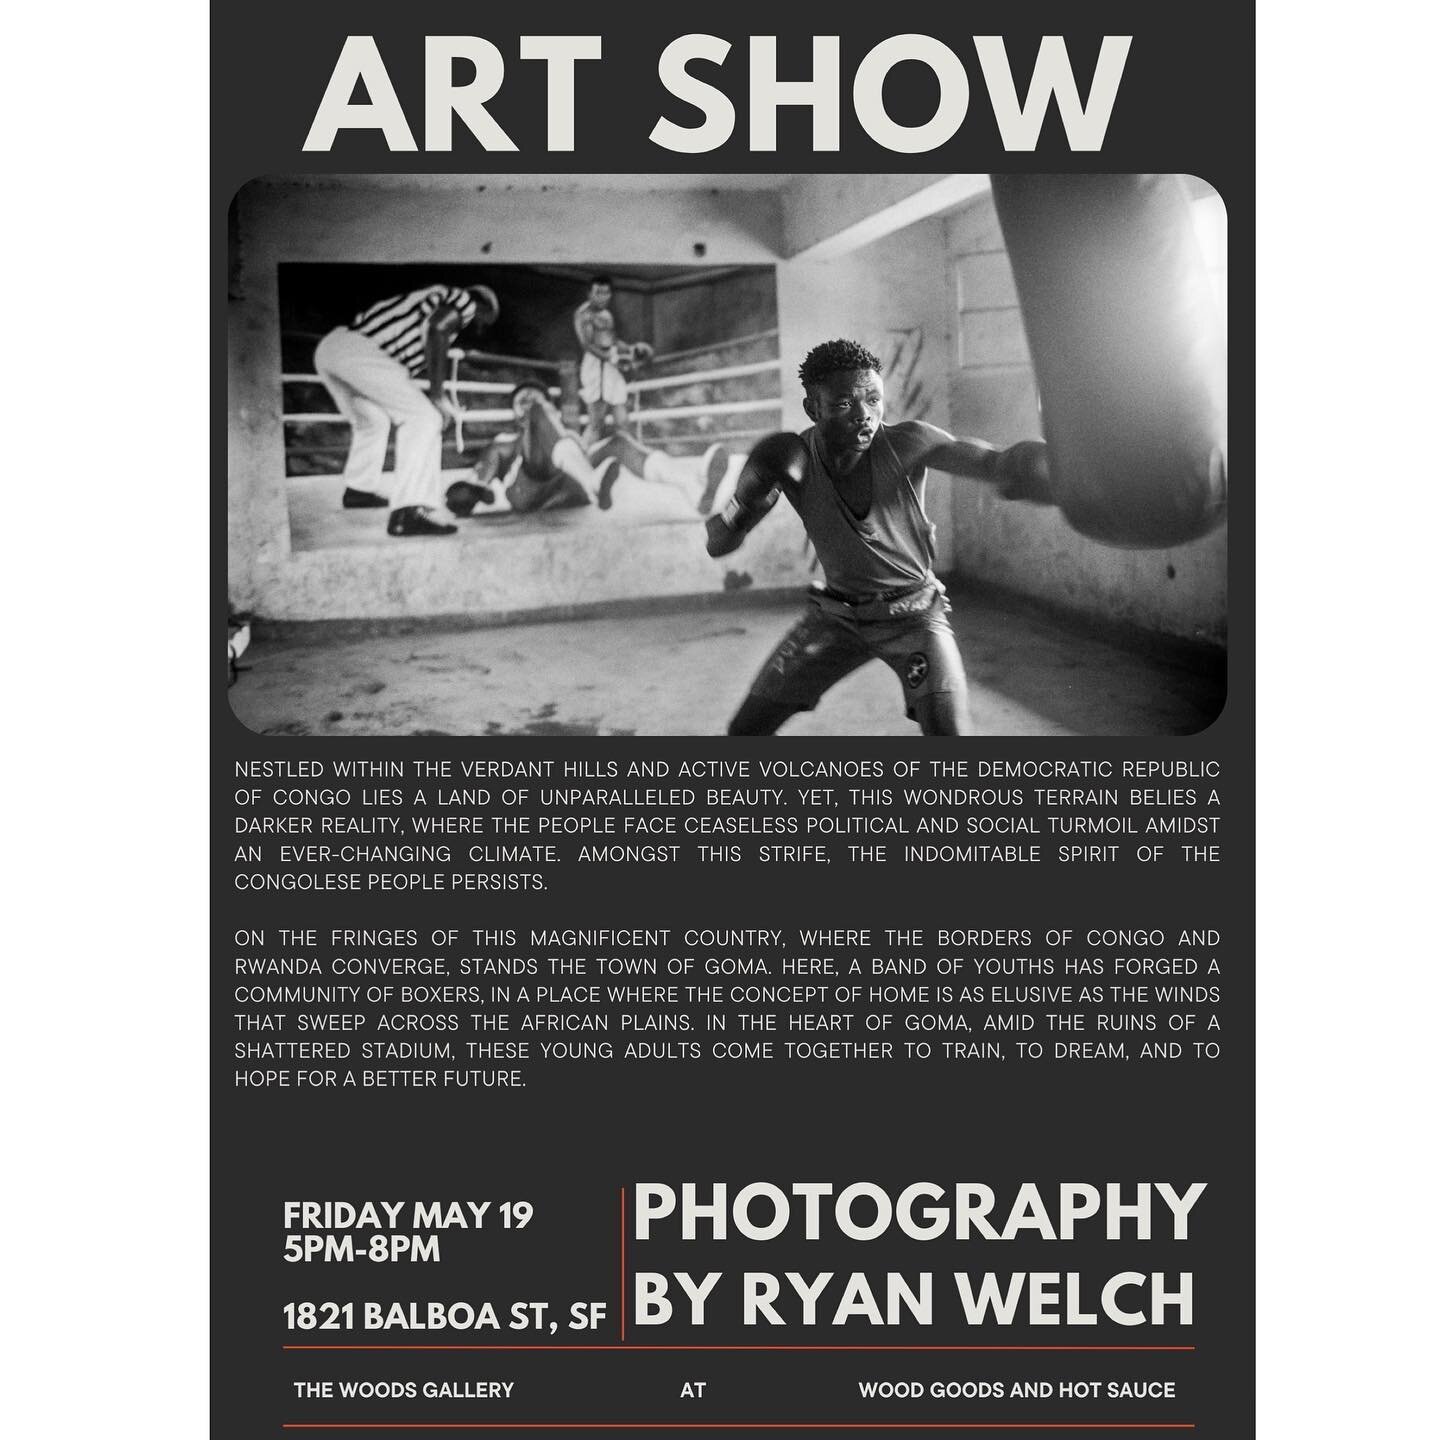 RYAN WELCH PHOTOGRAPHY
Join us this Friday, May 19
1821 Balboa St, SF 
5pm-8pm 
- - - - - - - - - - - - - - - - - - - - - - - - - - - 
Come learn about the empowering story of a community in Goma through the stunning photography of Ryan Welch. Throug